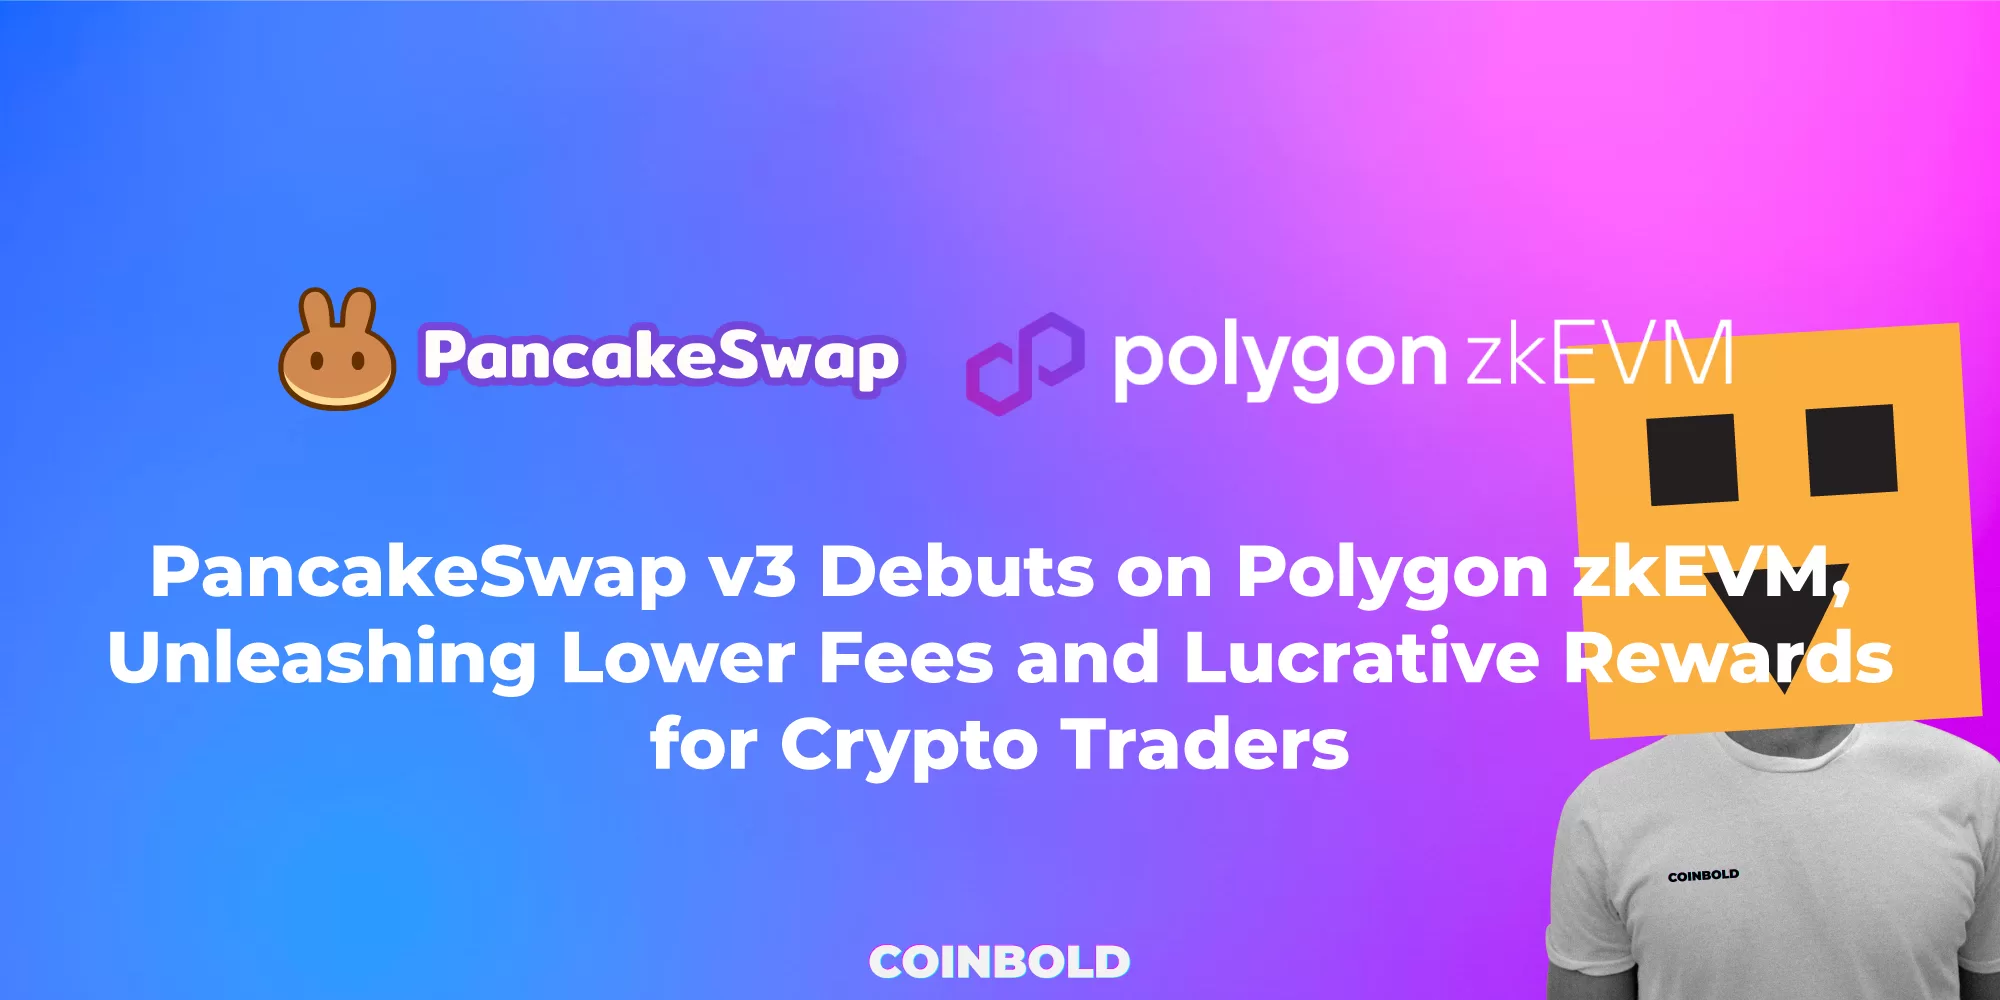 PancakeSwap v3 Debuts on Polygon zkEVM Unleashing Lower Fees and Lucrative Rewards for Crypto Traders jpg